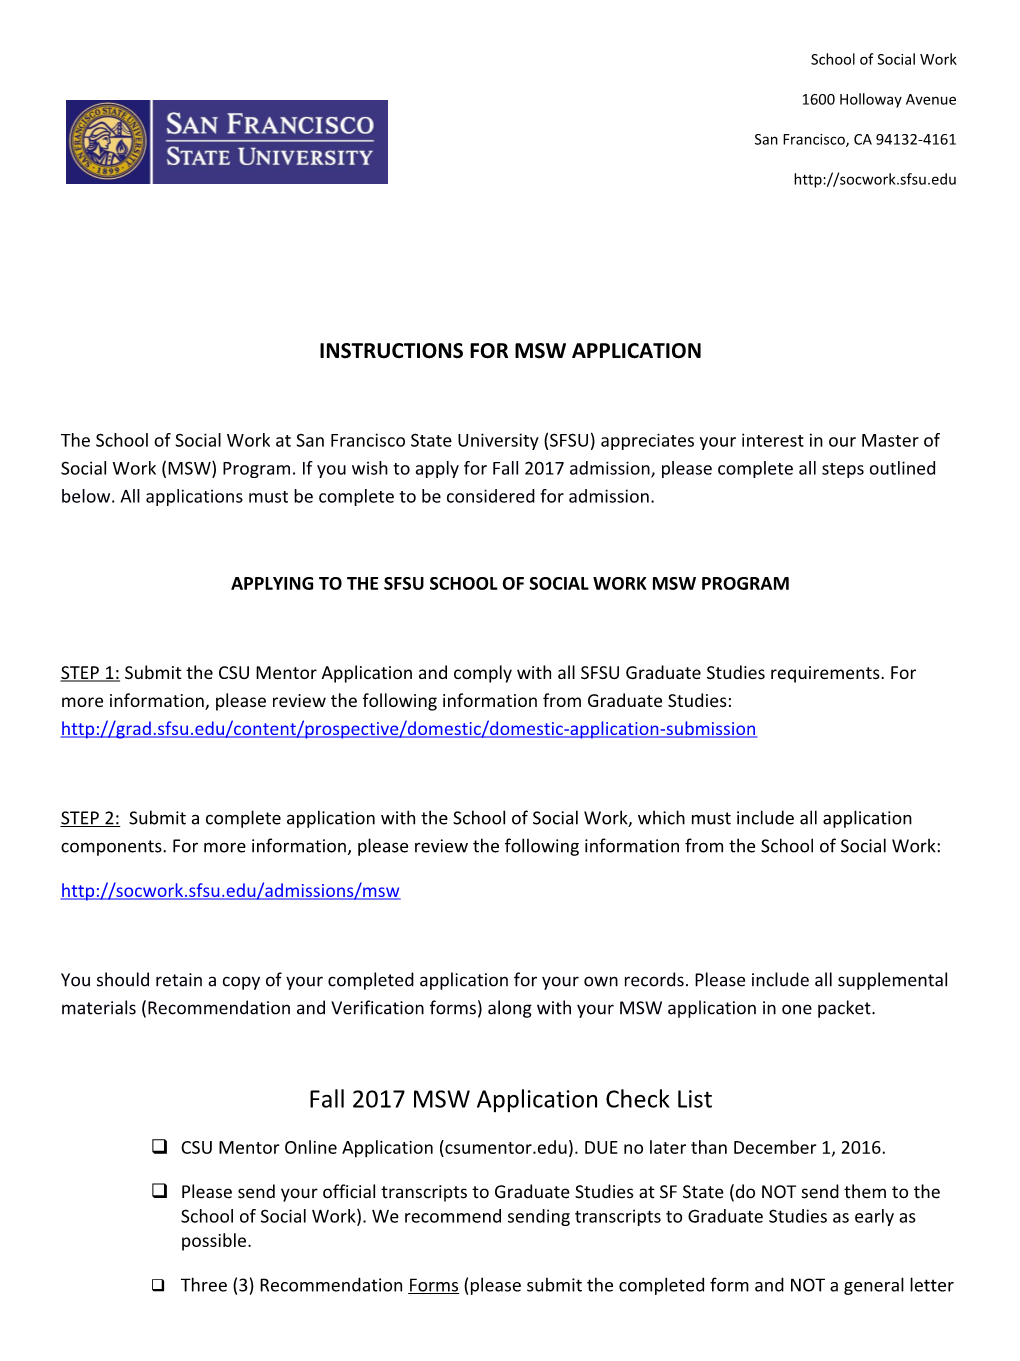 Instructions for Msw Application